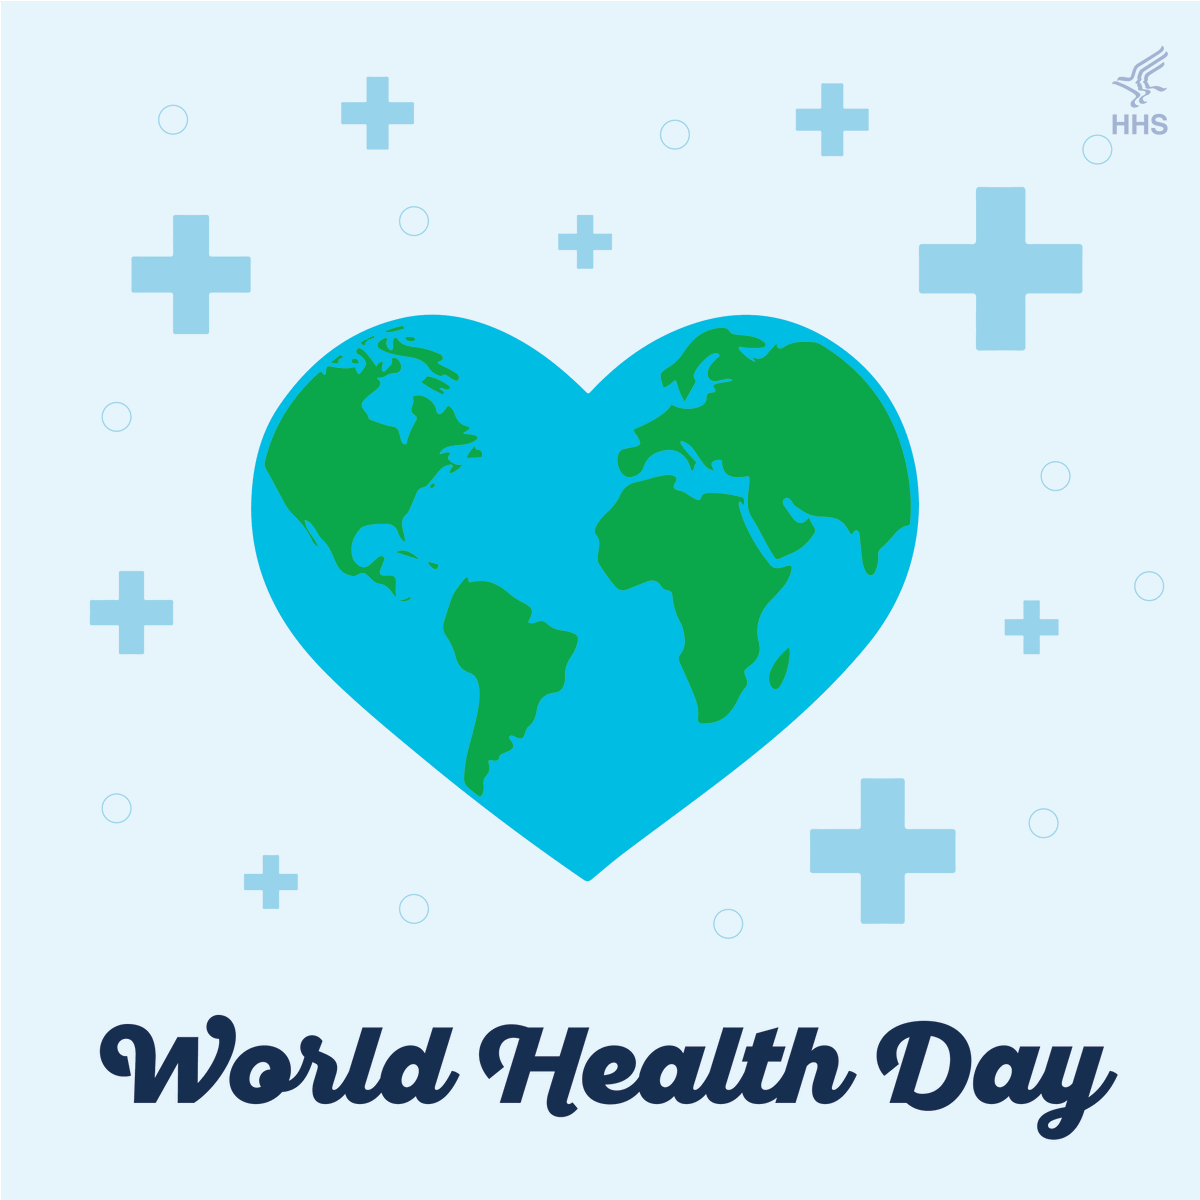 A healthier world means a happier, more unified world. By making health care more accessible to vulnerable populations and prioritizing research on life-saving medicines, we can work toward global health equity. Happy #WorldHealthDay — let's get to work. 🌏